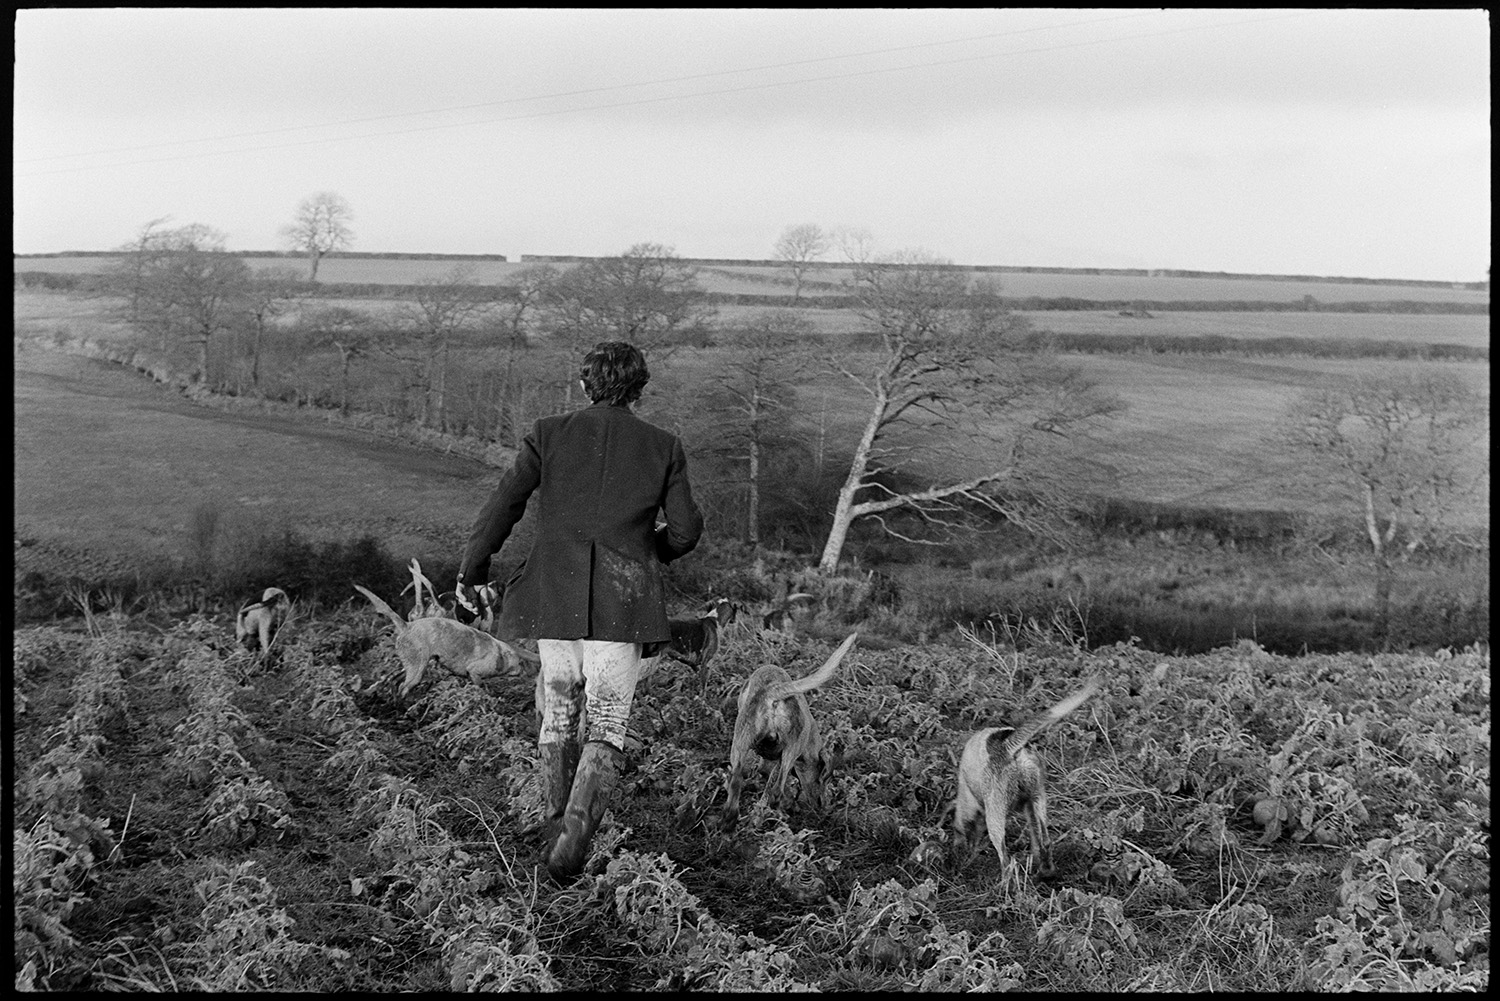 A man following hounds on  hunt across and field with the remains of a crop near Riddlecombe. A landscape of trees and fields can be seen in the background.